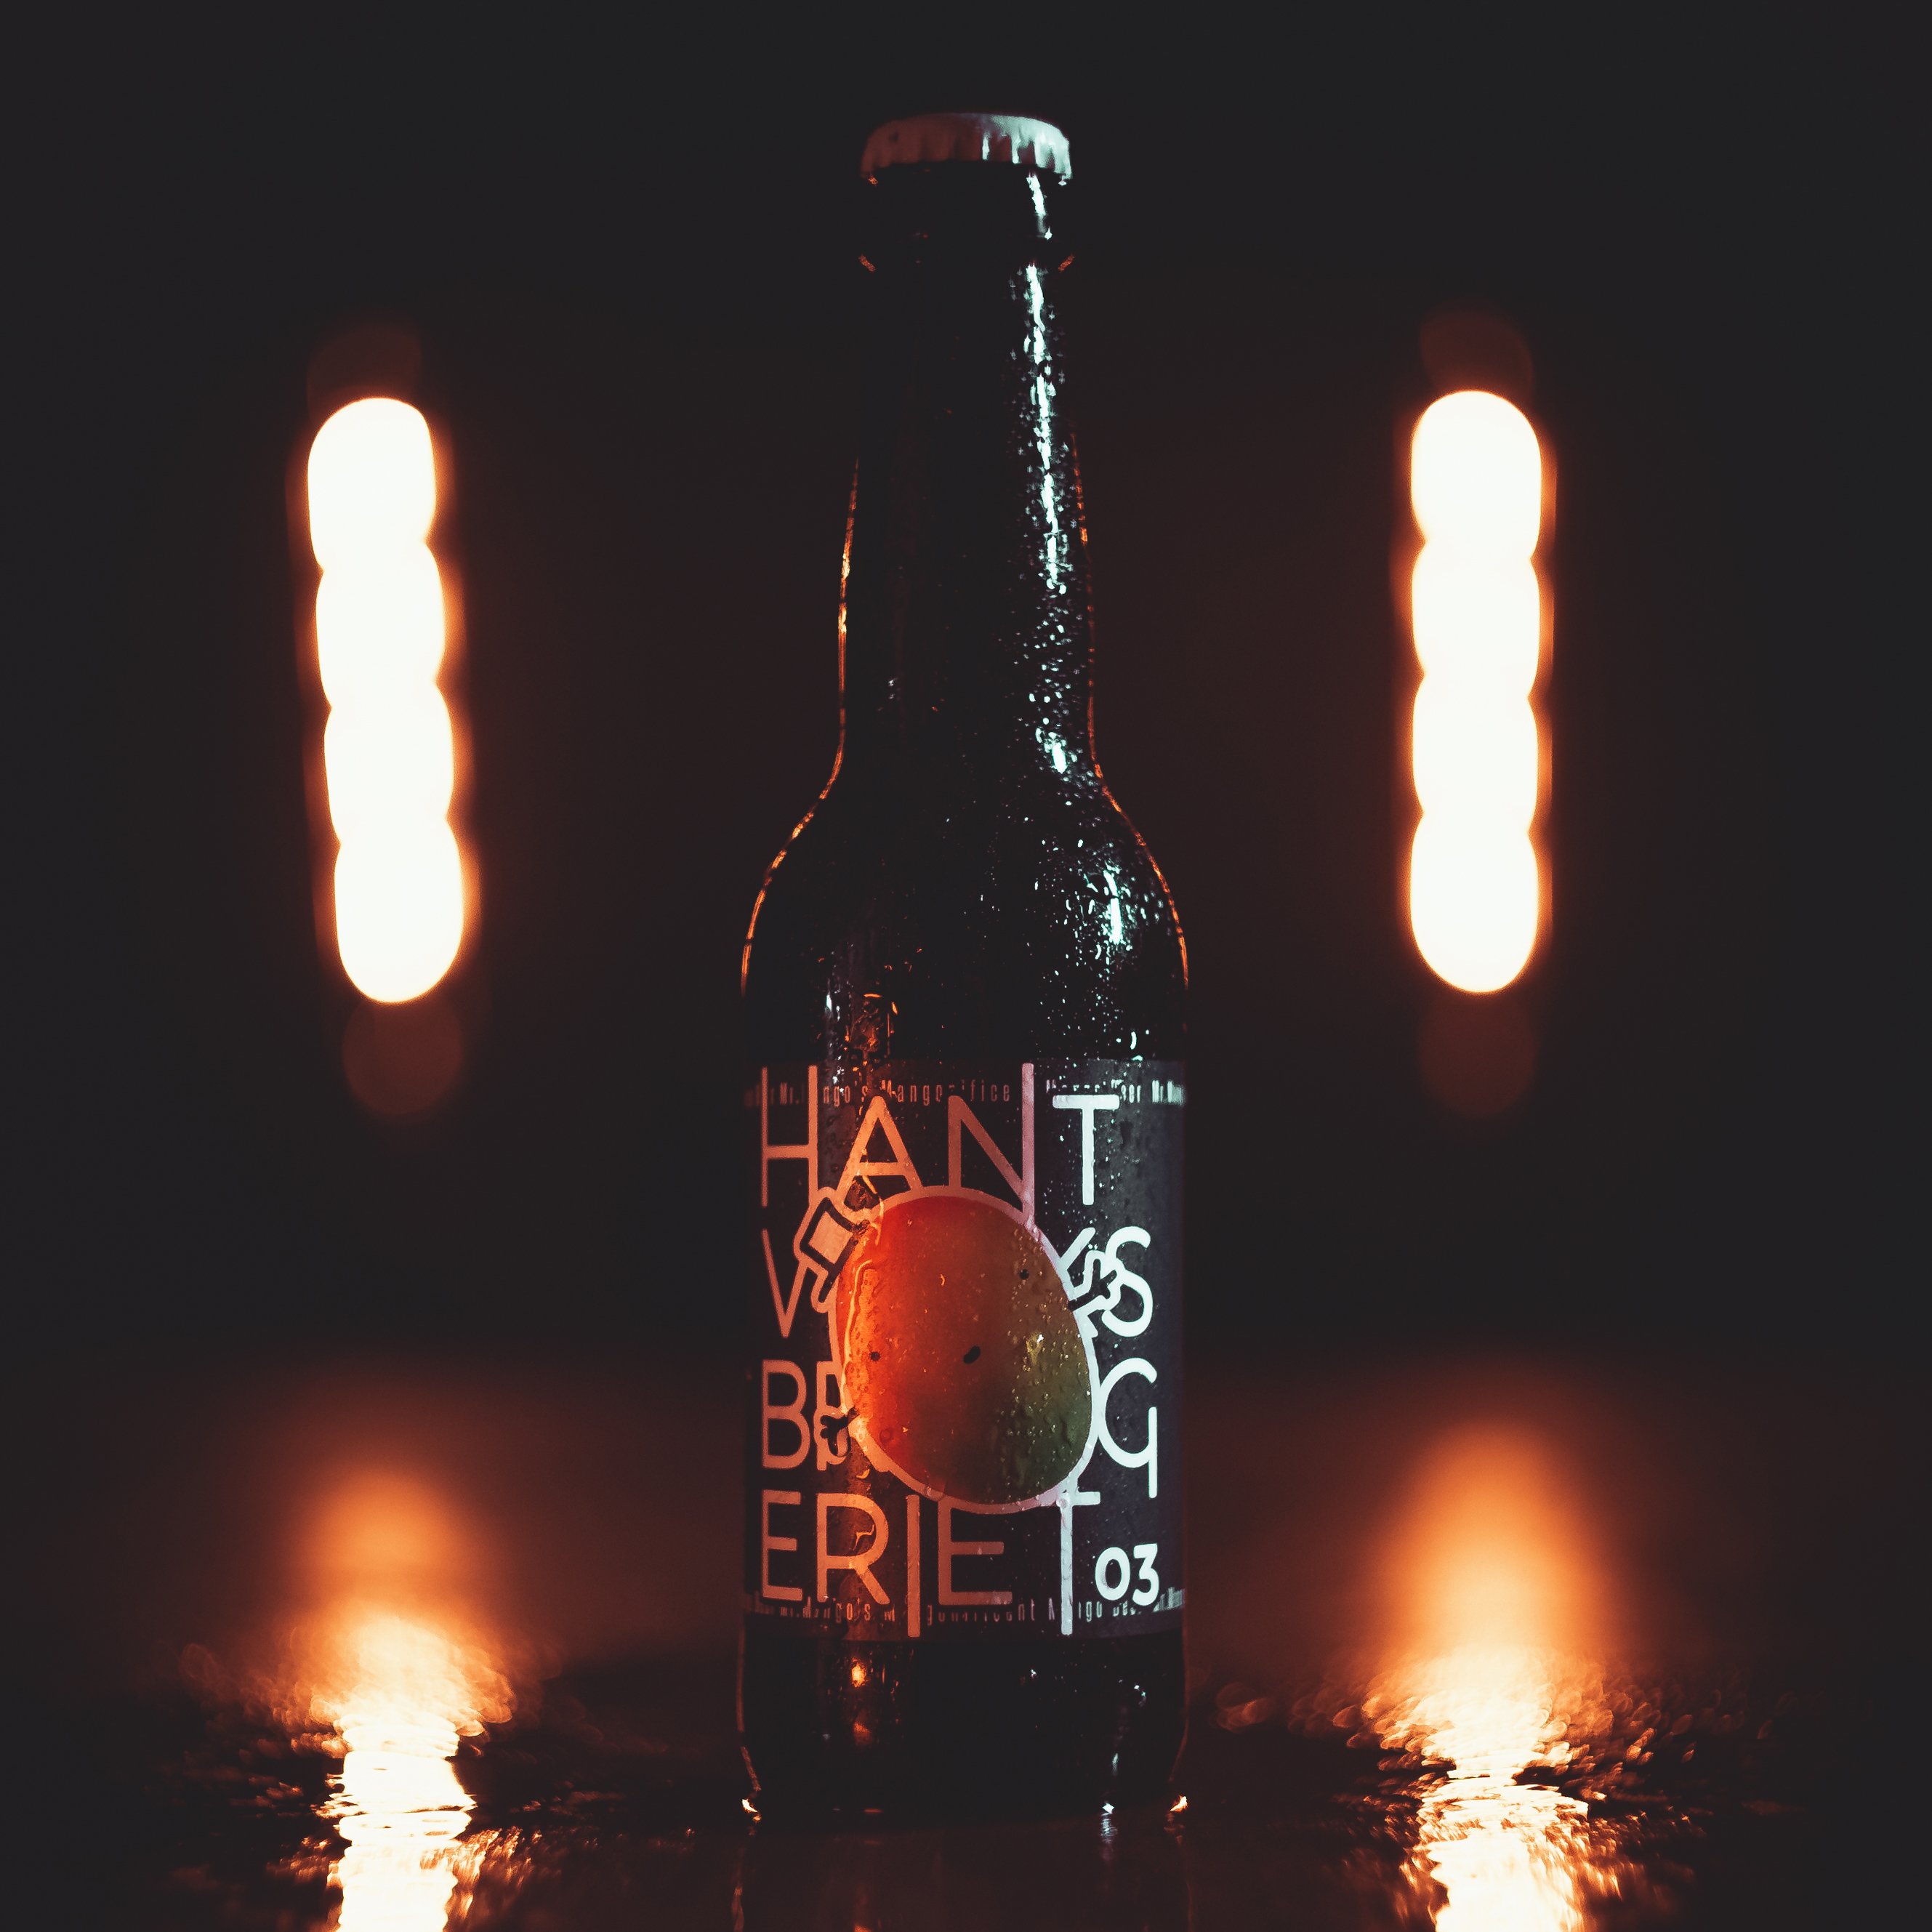 MANGONIFICENT BEER (1 of 3)